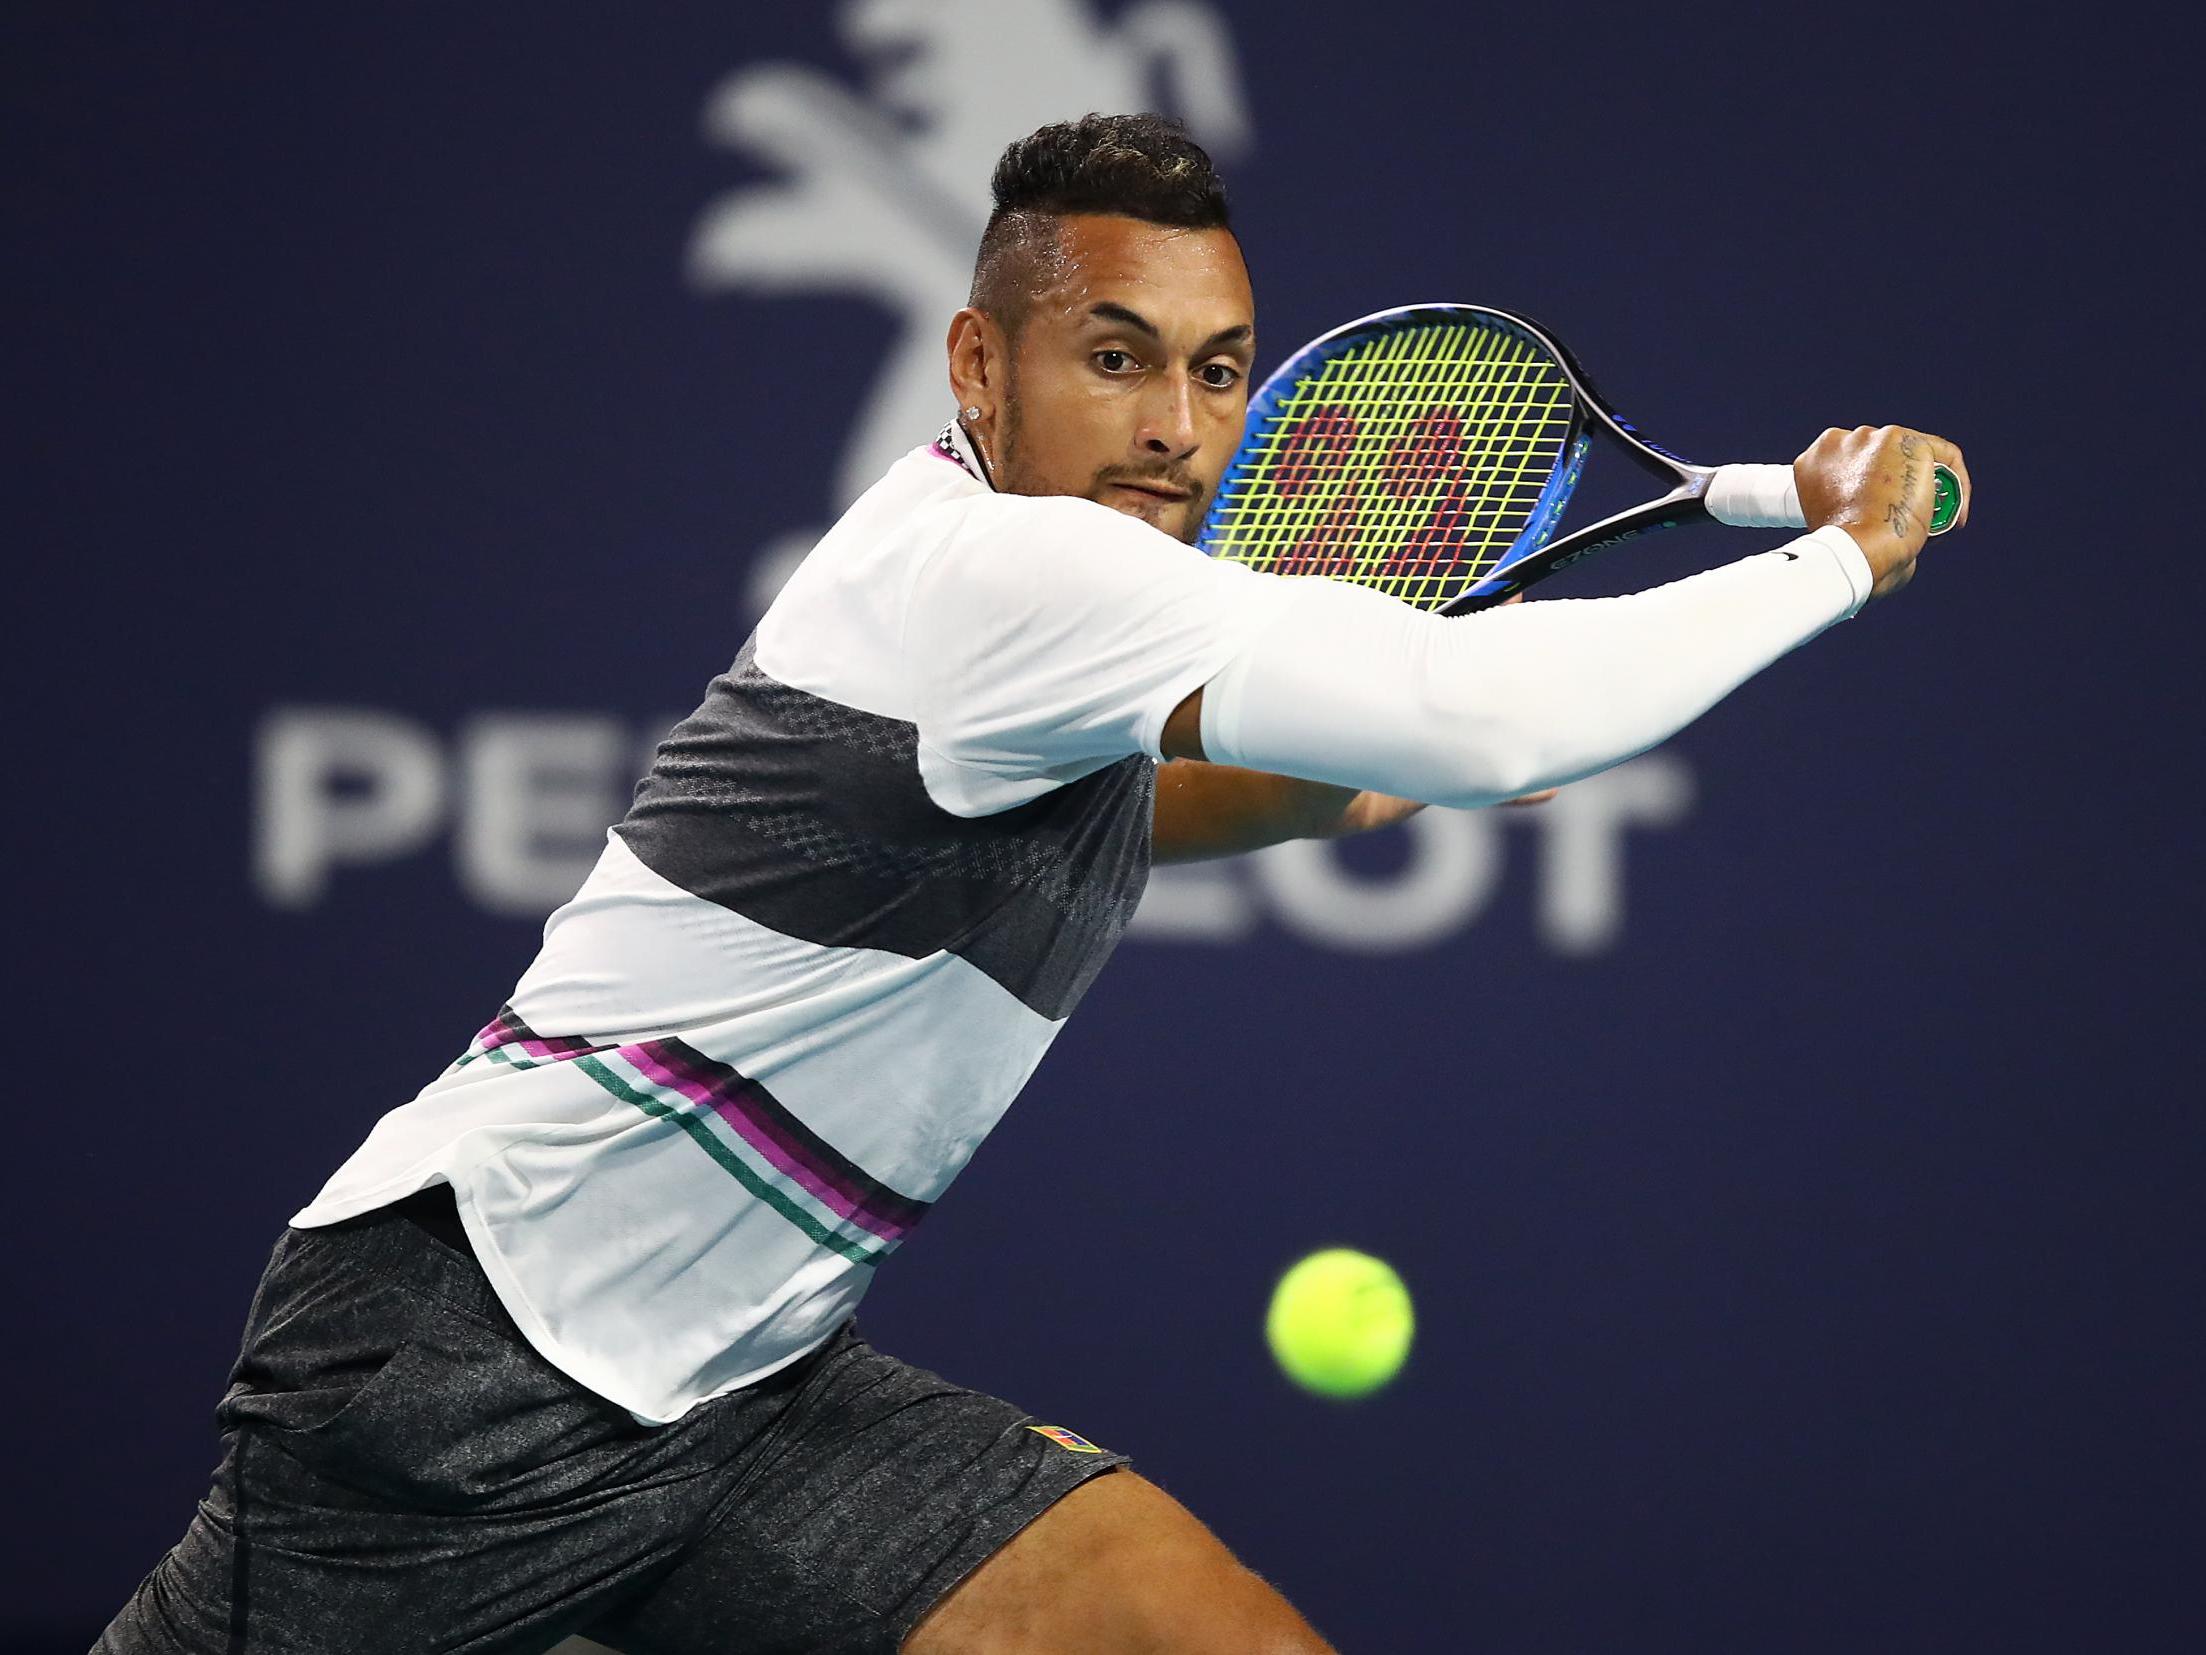 Kyrgios in action at the Miami Open